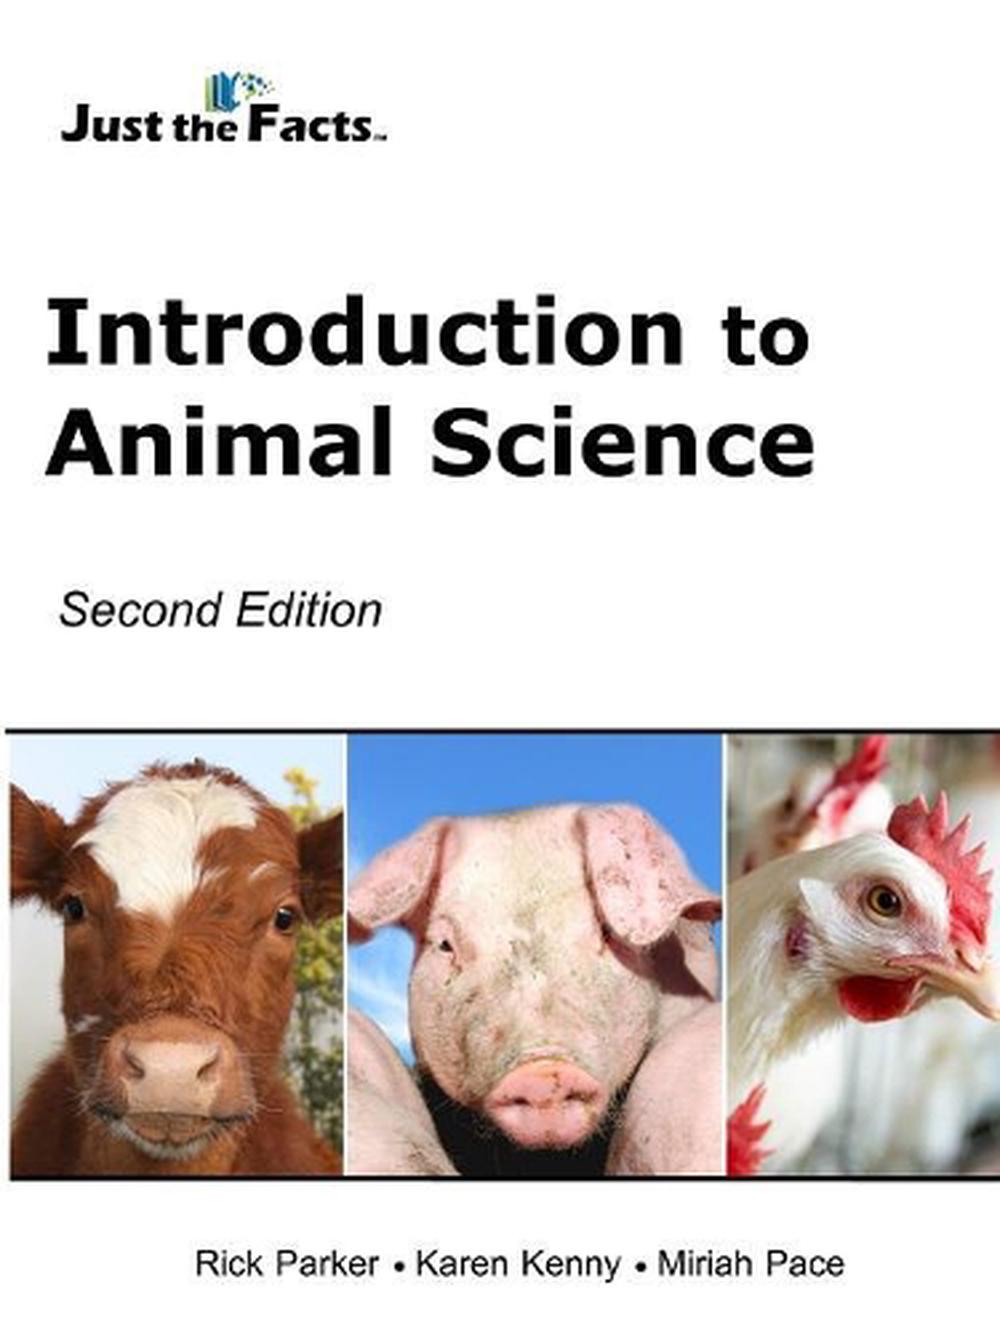 thesis about animal science